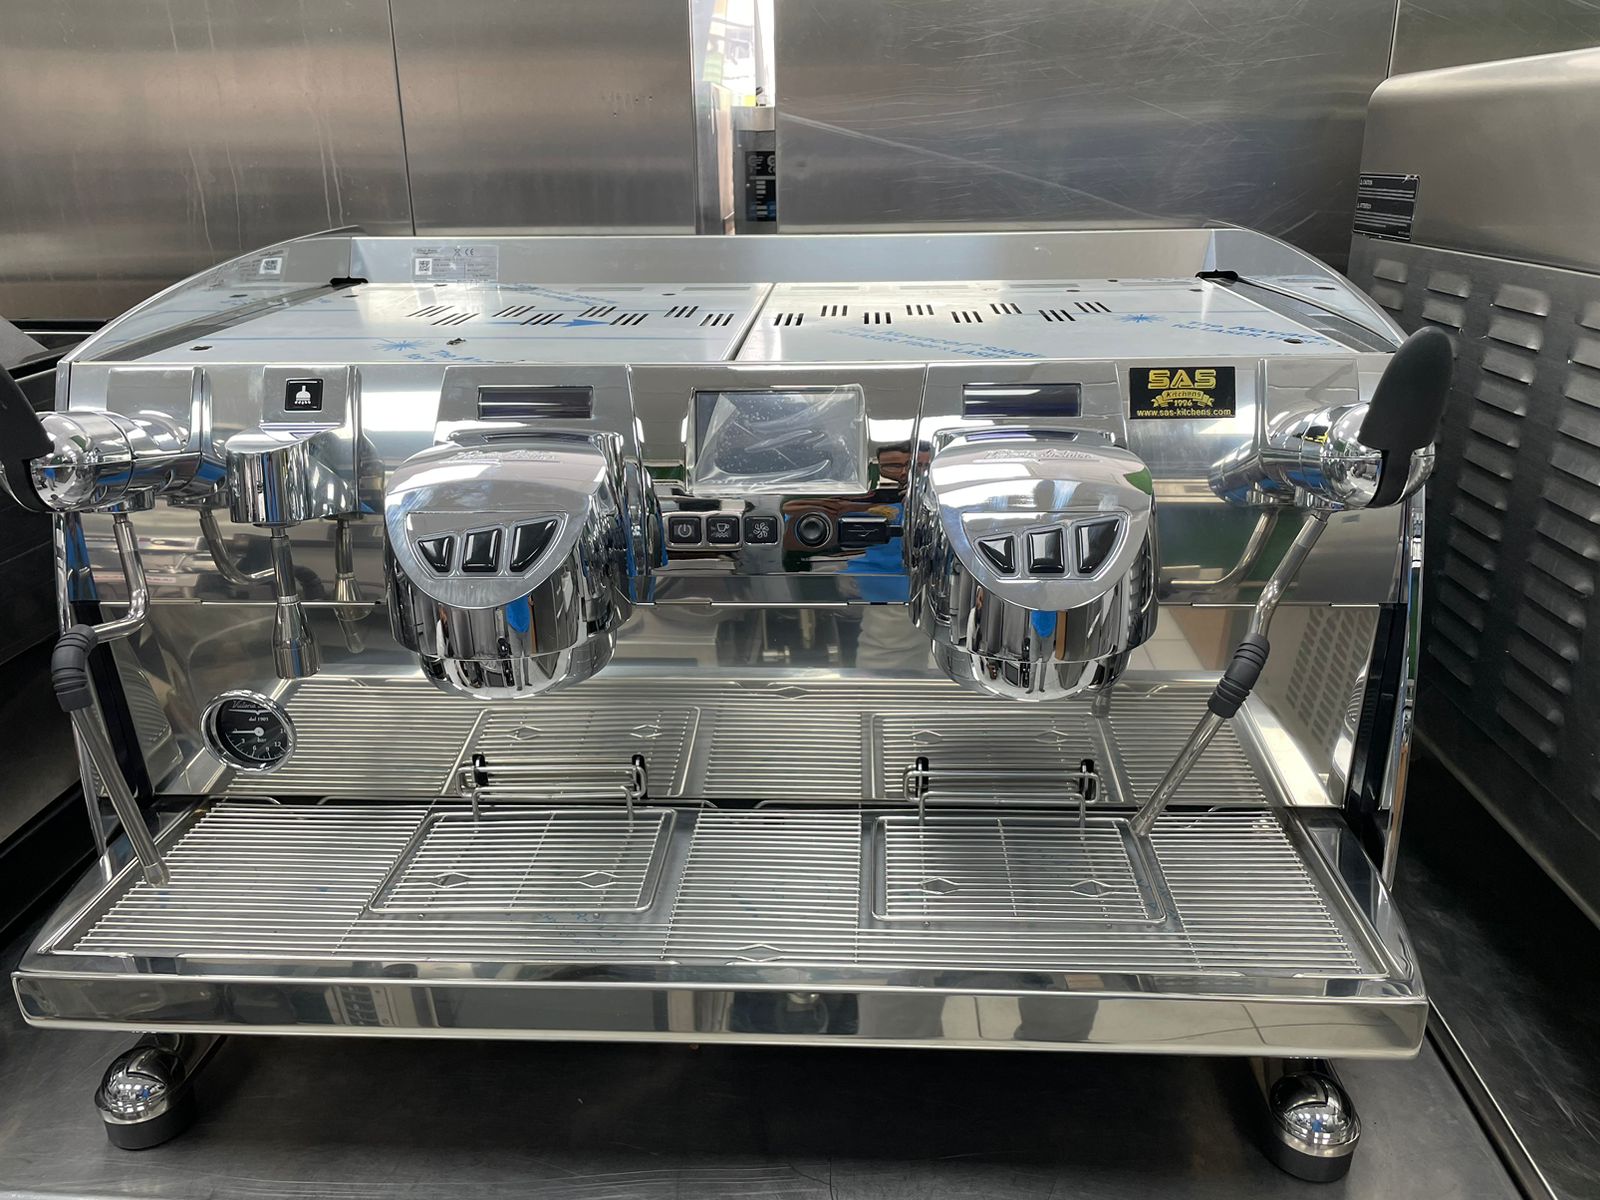 Branded Coffee Machine for Sale